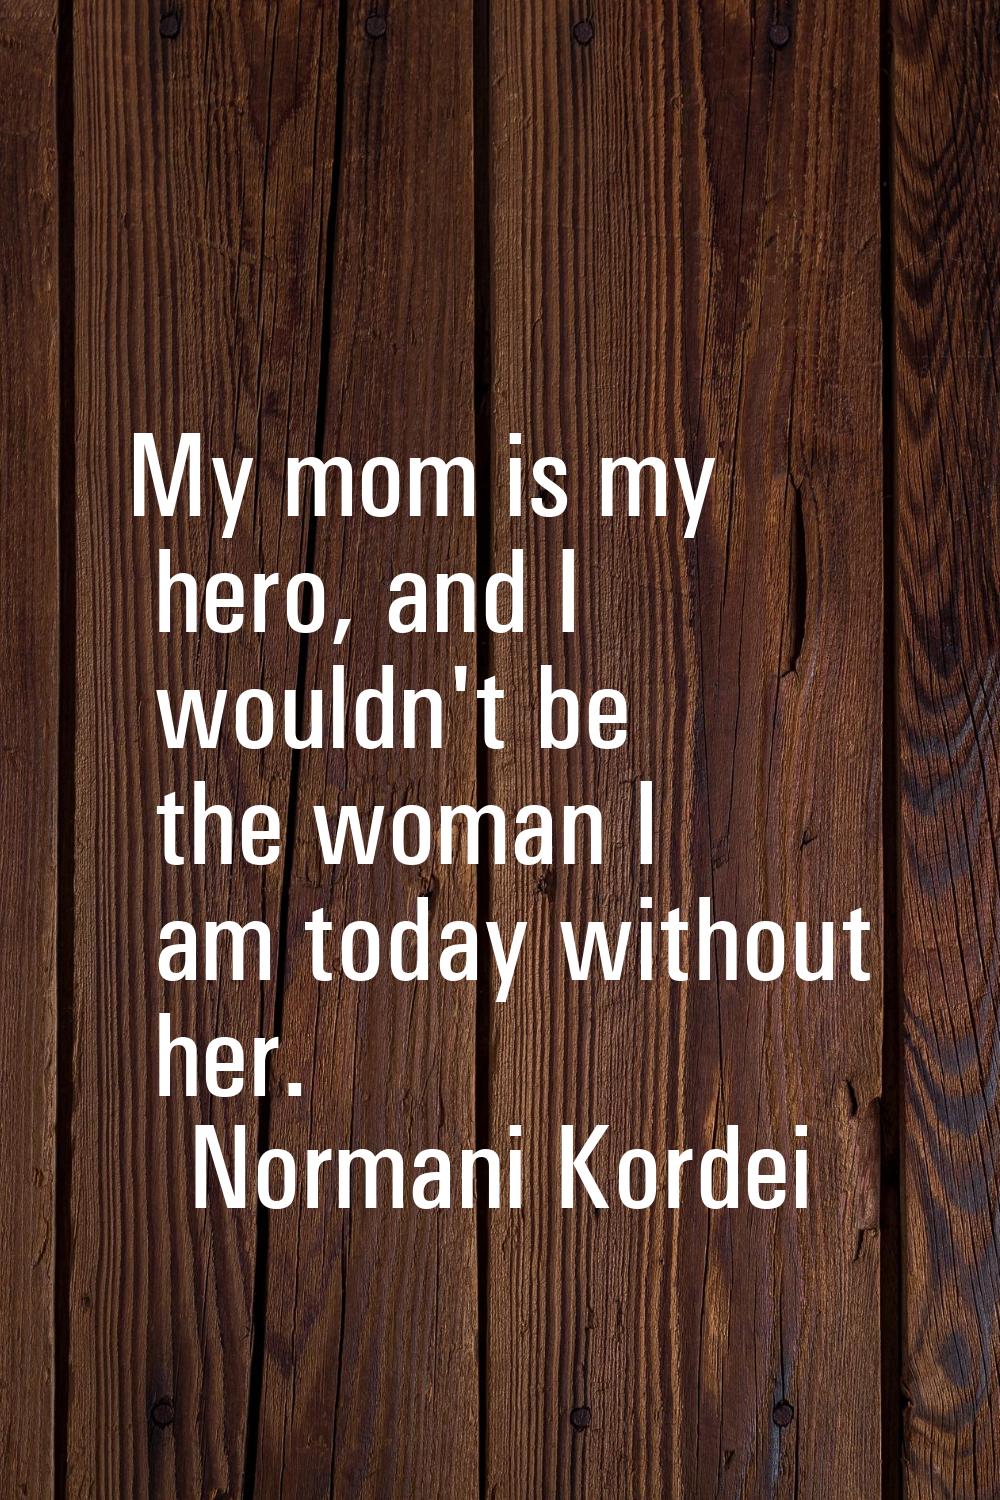 My mom is my hero, and I wouldn't be the woman I am today without her.